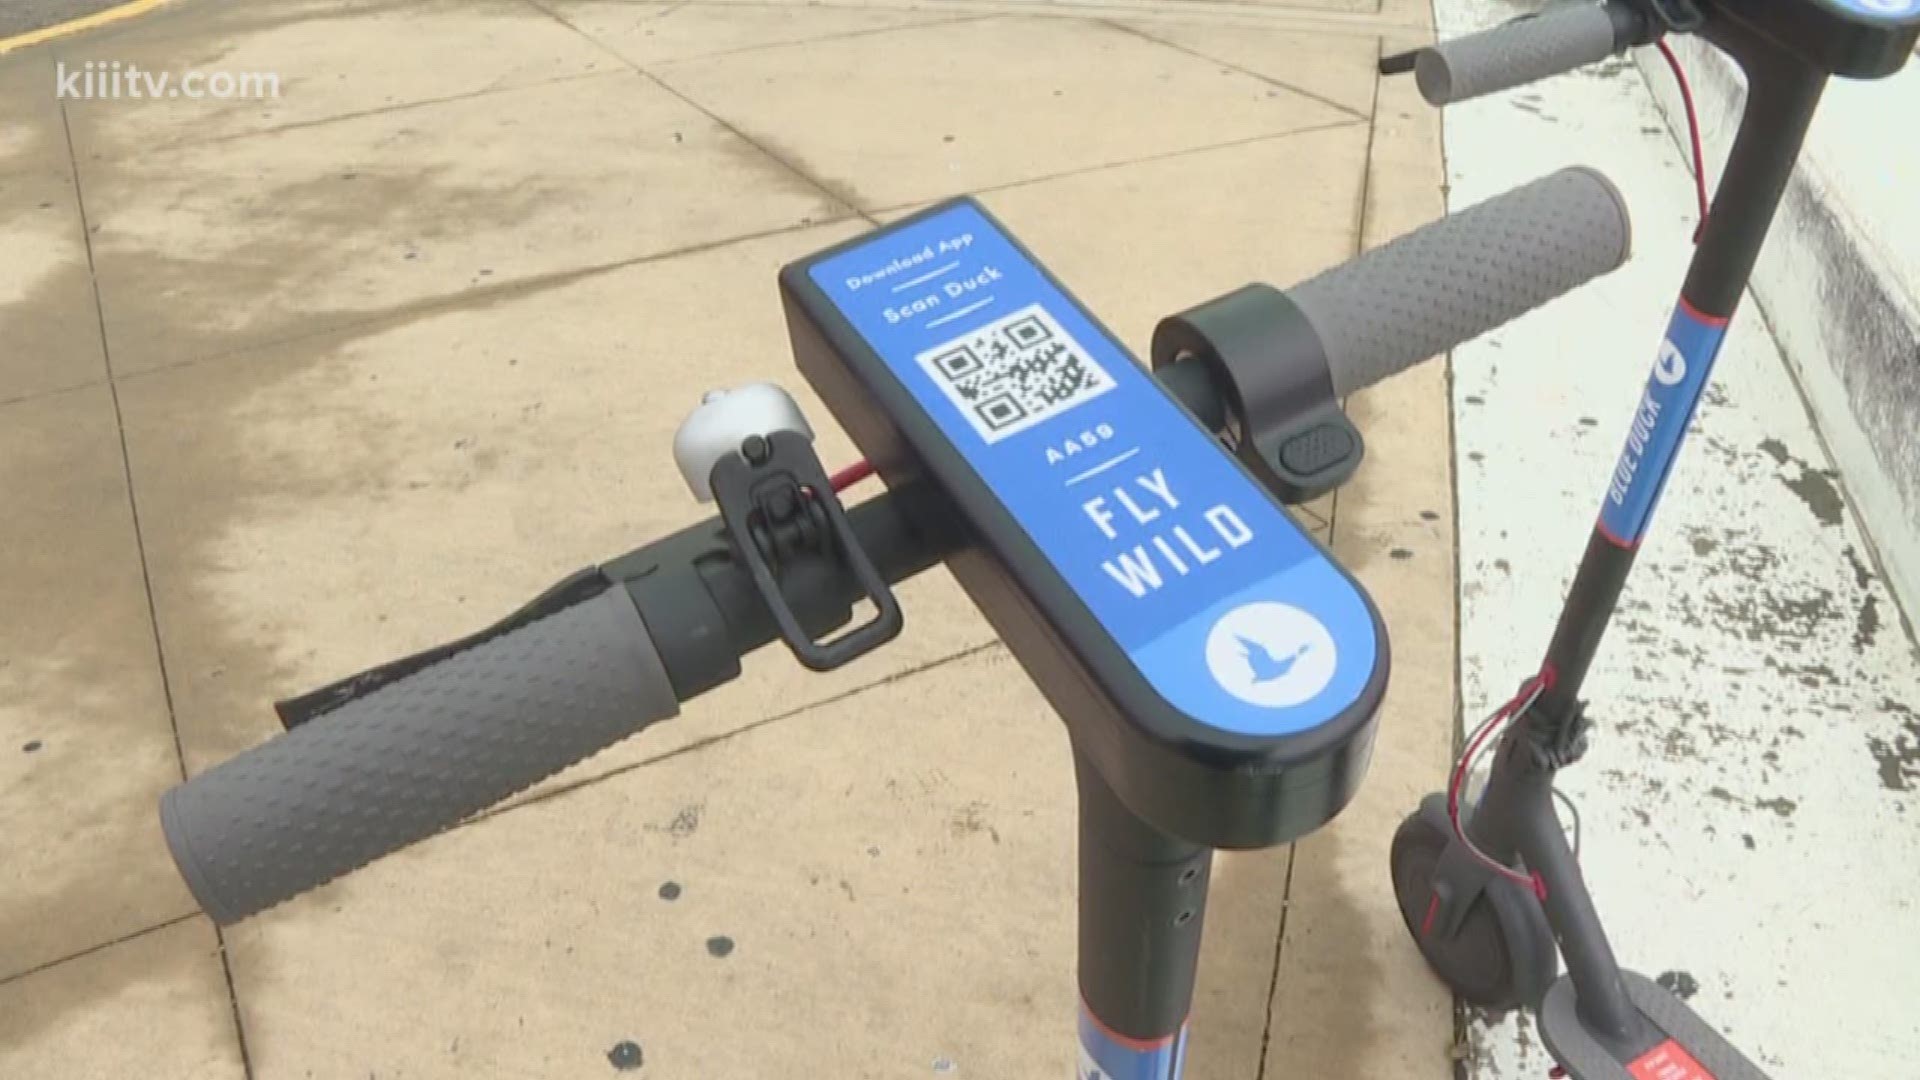 Last week Corpus Christi's city council approved an ordinance that would cost the rental companies $1 per day per scooter operating in the city. The companies were given 10 business days to sign the licensing agreement.